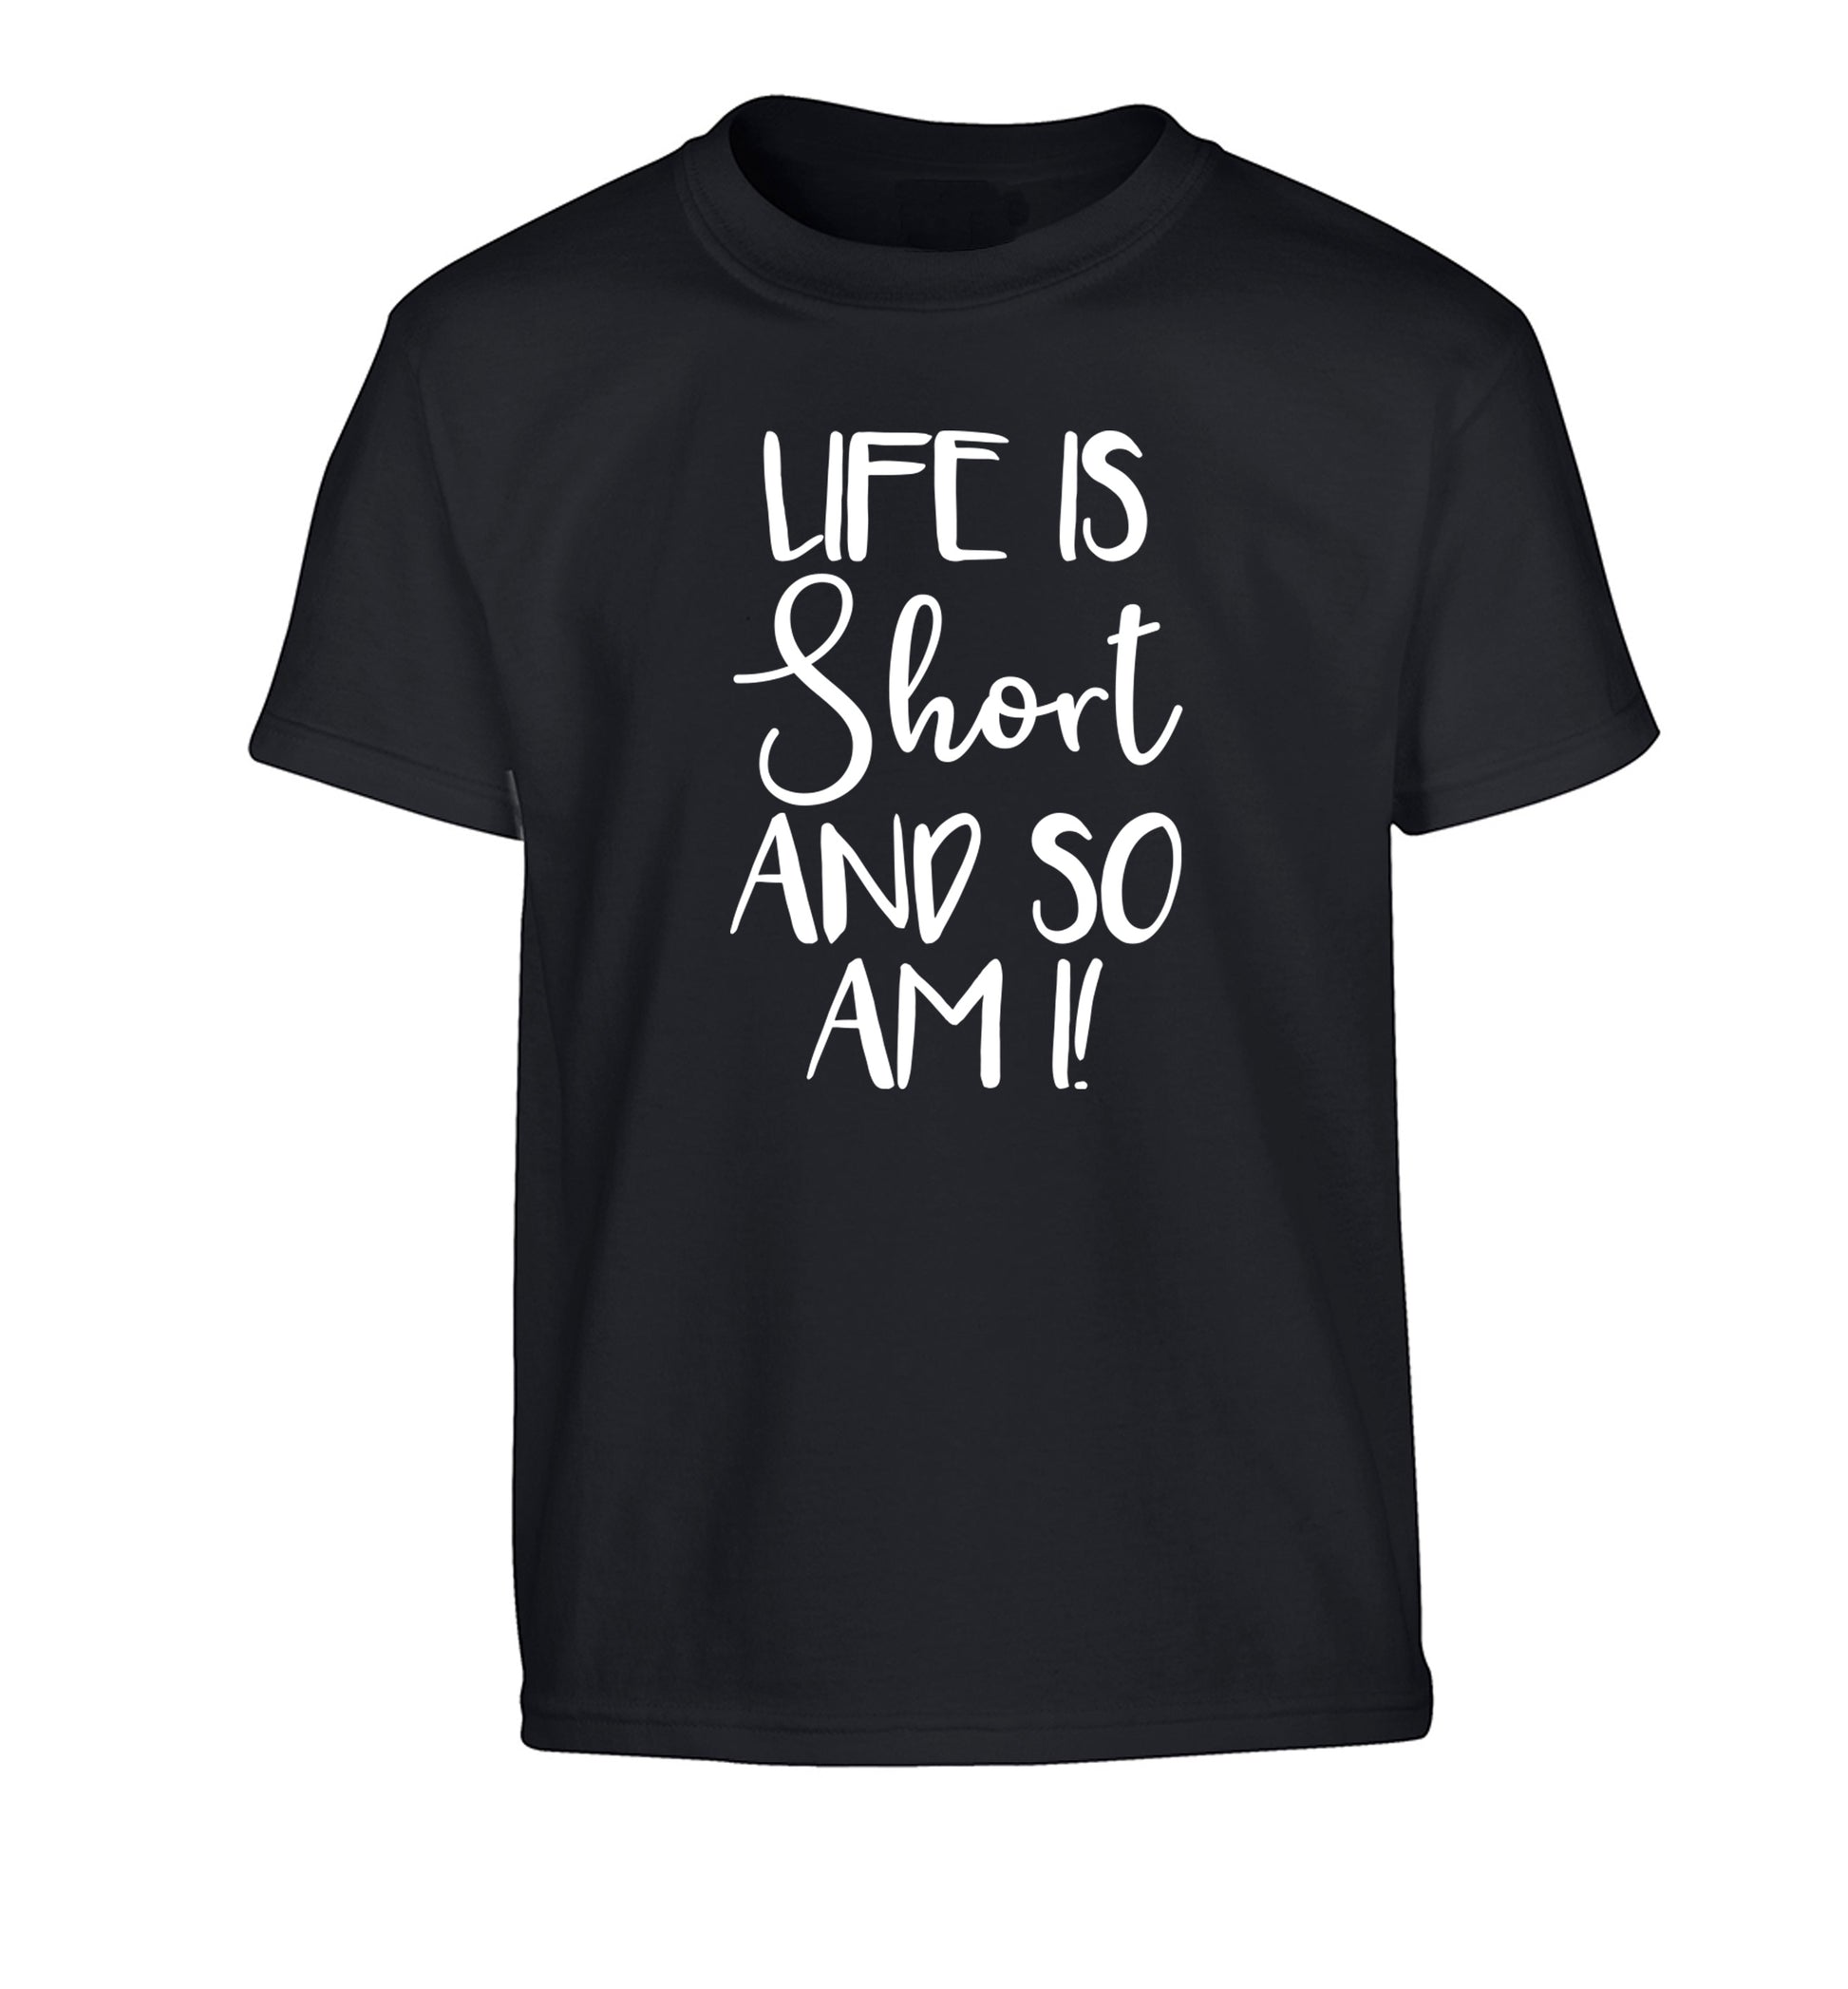 Life is short and so am I! Children's black Tshirt 12-13 Years